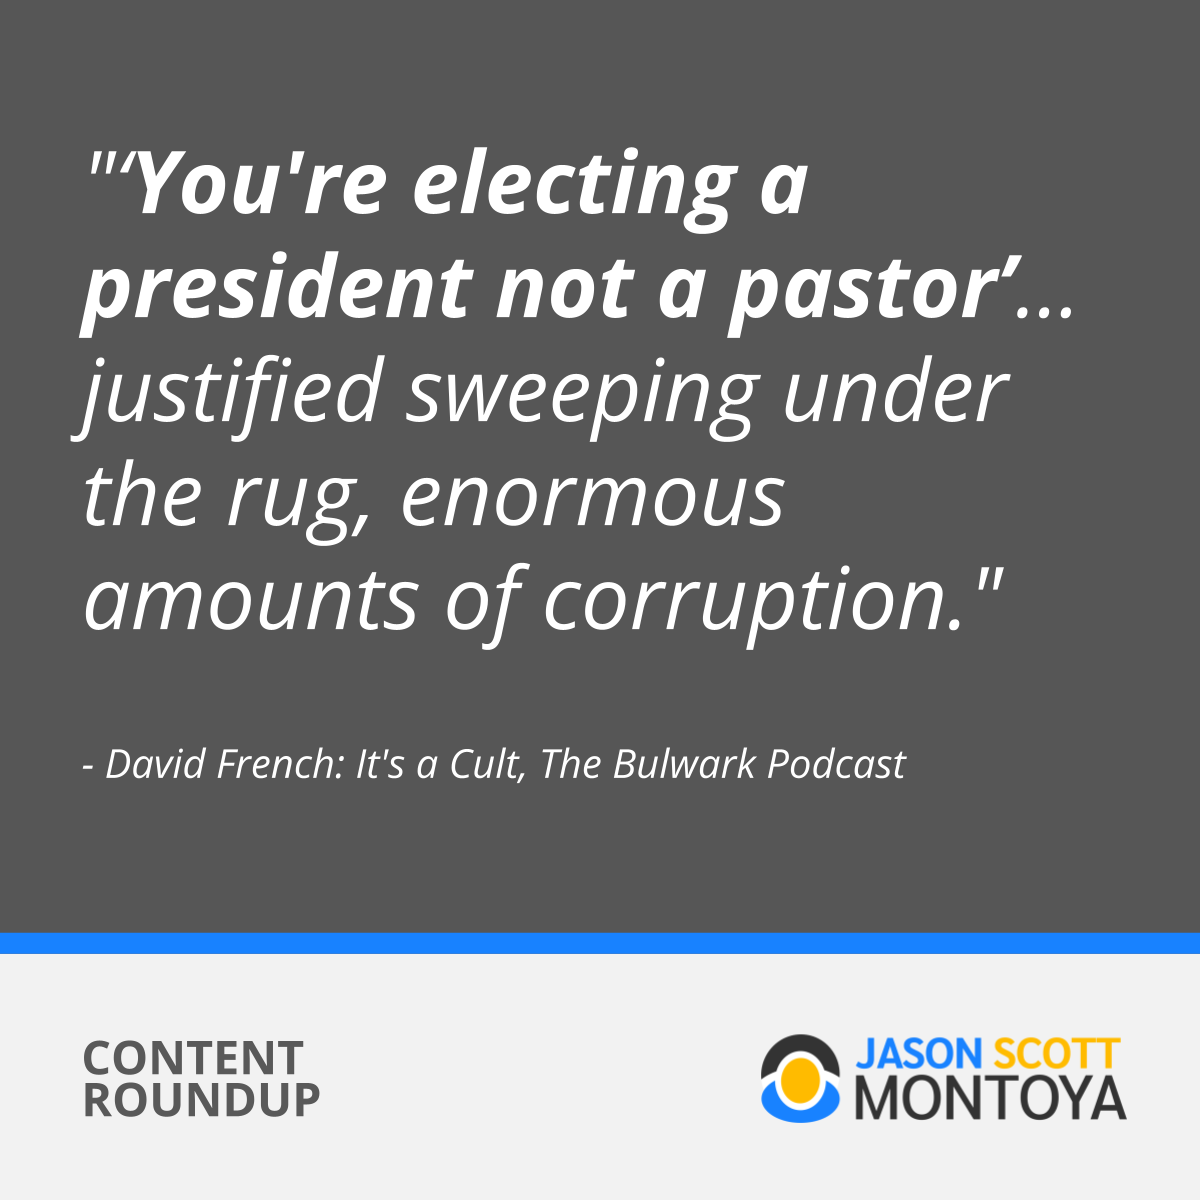 “'you're electing a president not a pastor'… has justified sweeping under the rug enormous amounts of corruption.